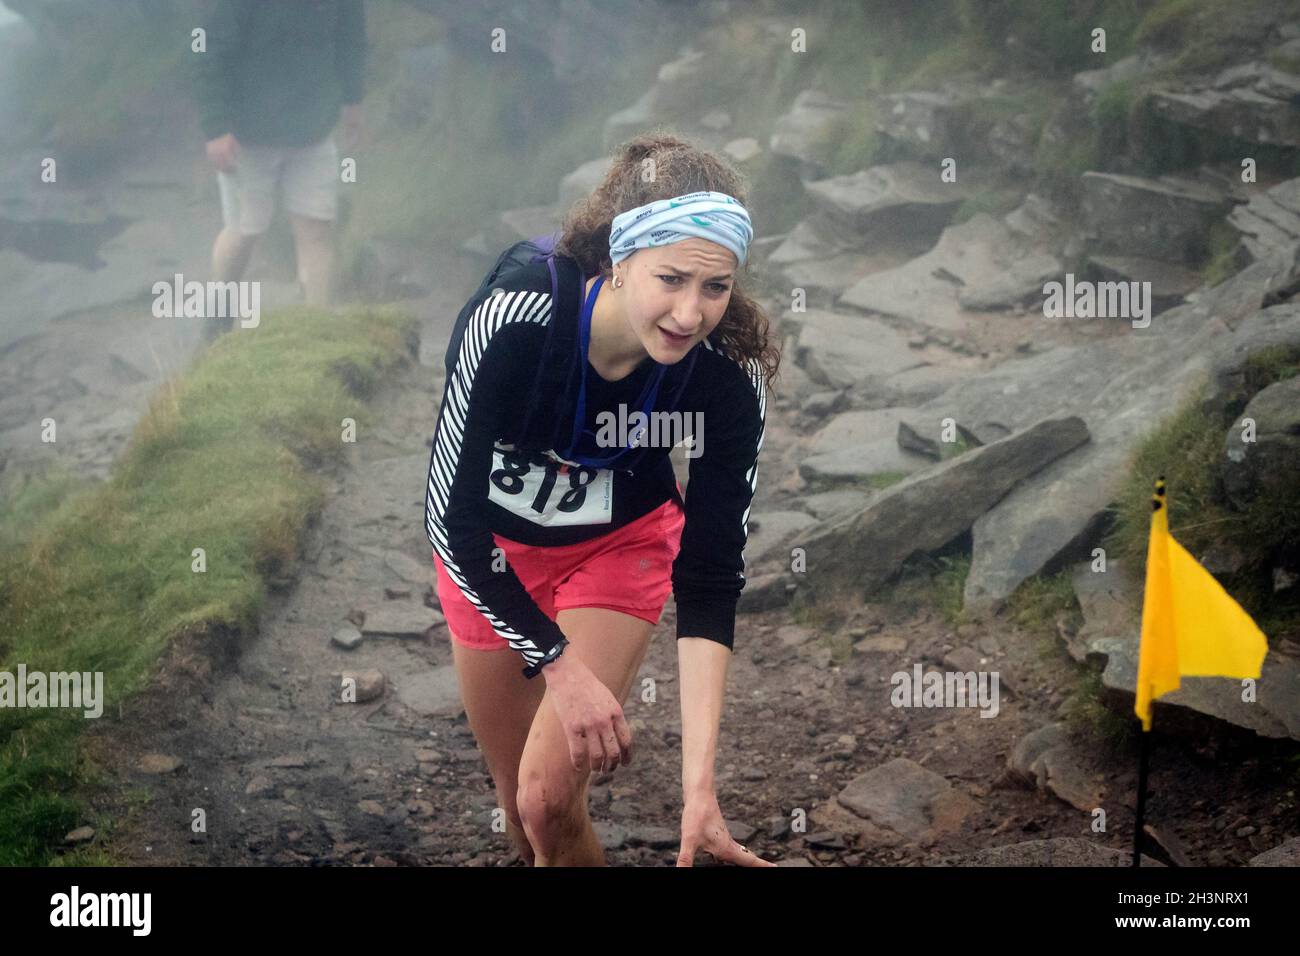 Rose Mather won the women's race in the 2021 Three Peaks Race Stock Photo